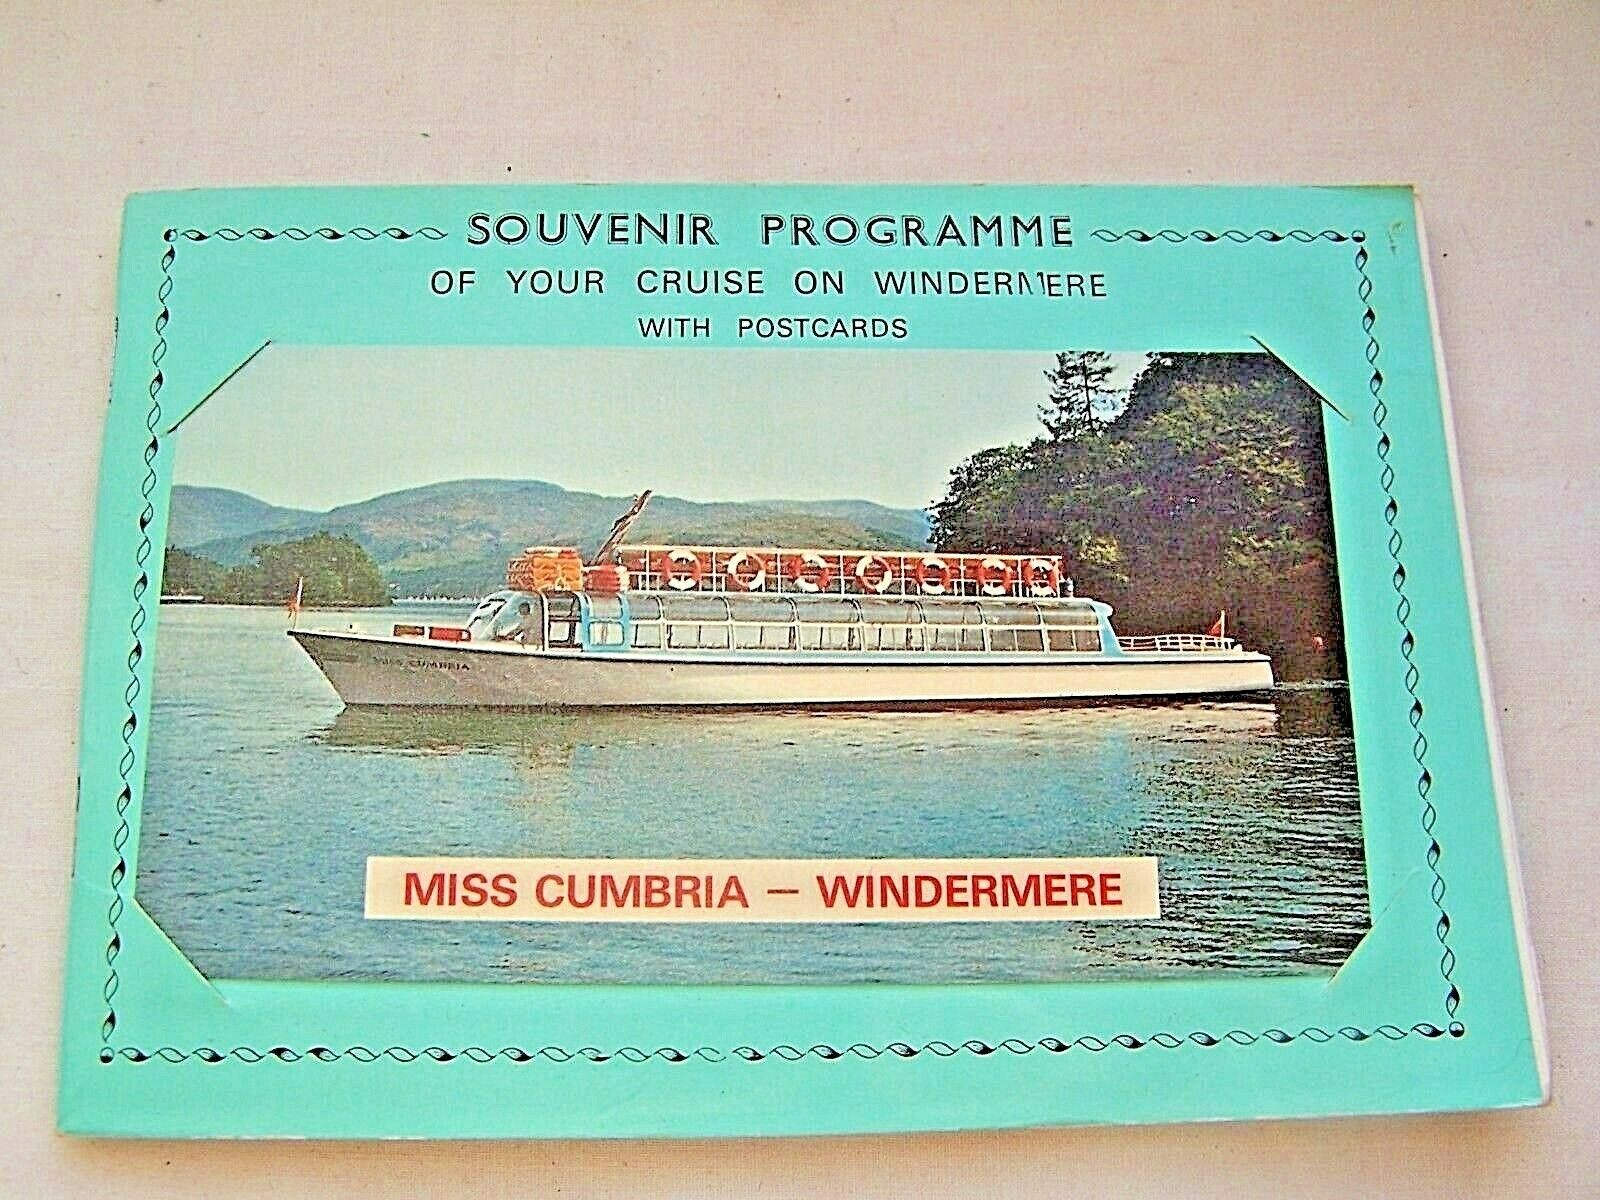 House Clearance - POSTCARDS, LAKE DISTRICT, LAKE WINDERMERE , MISS CUMBRIA, CRUISE, BOAT, SOUVENIR